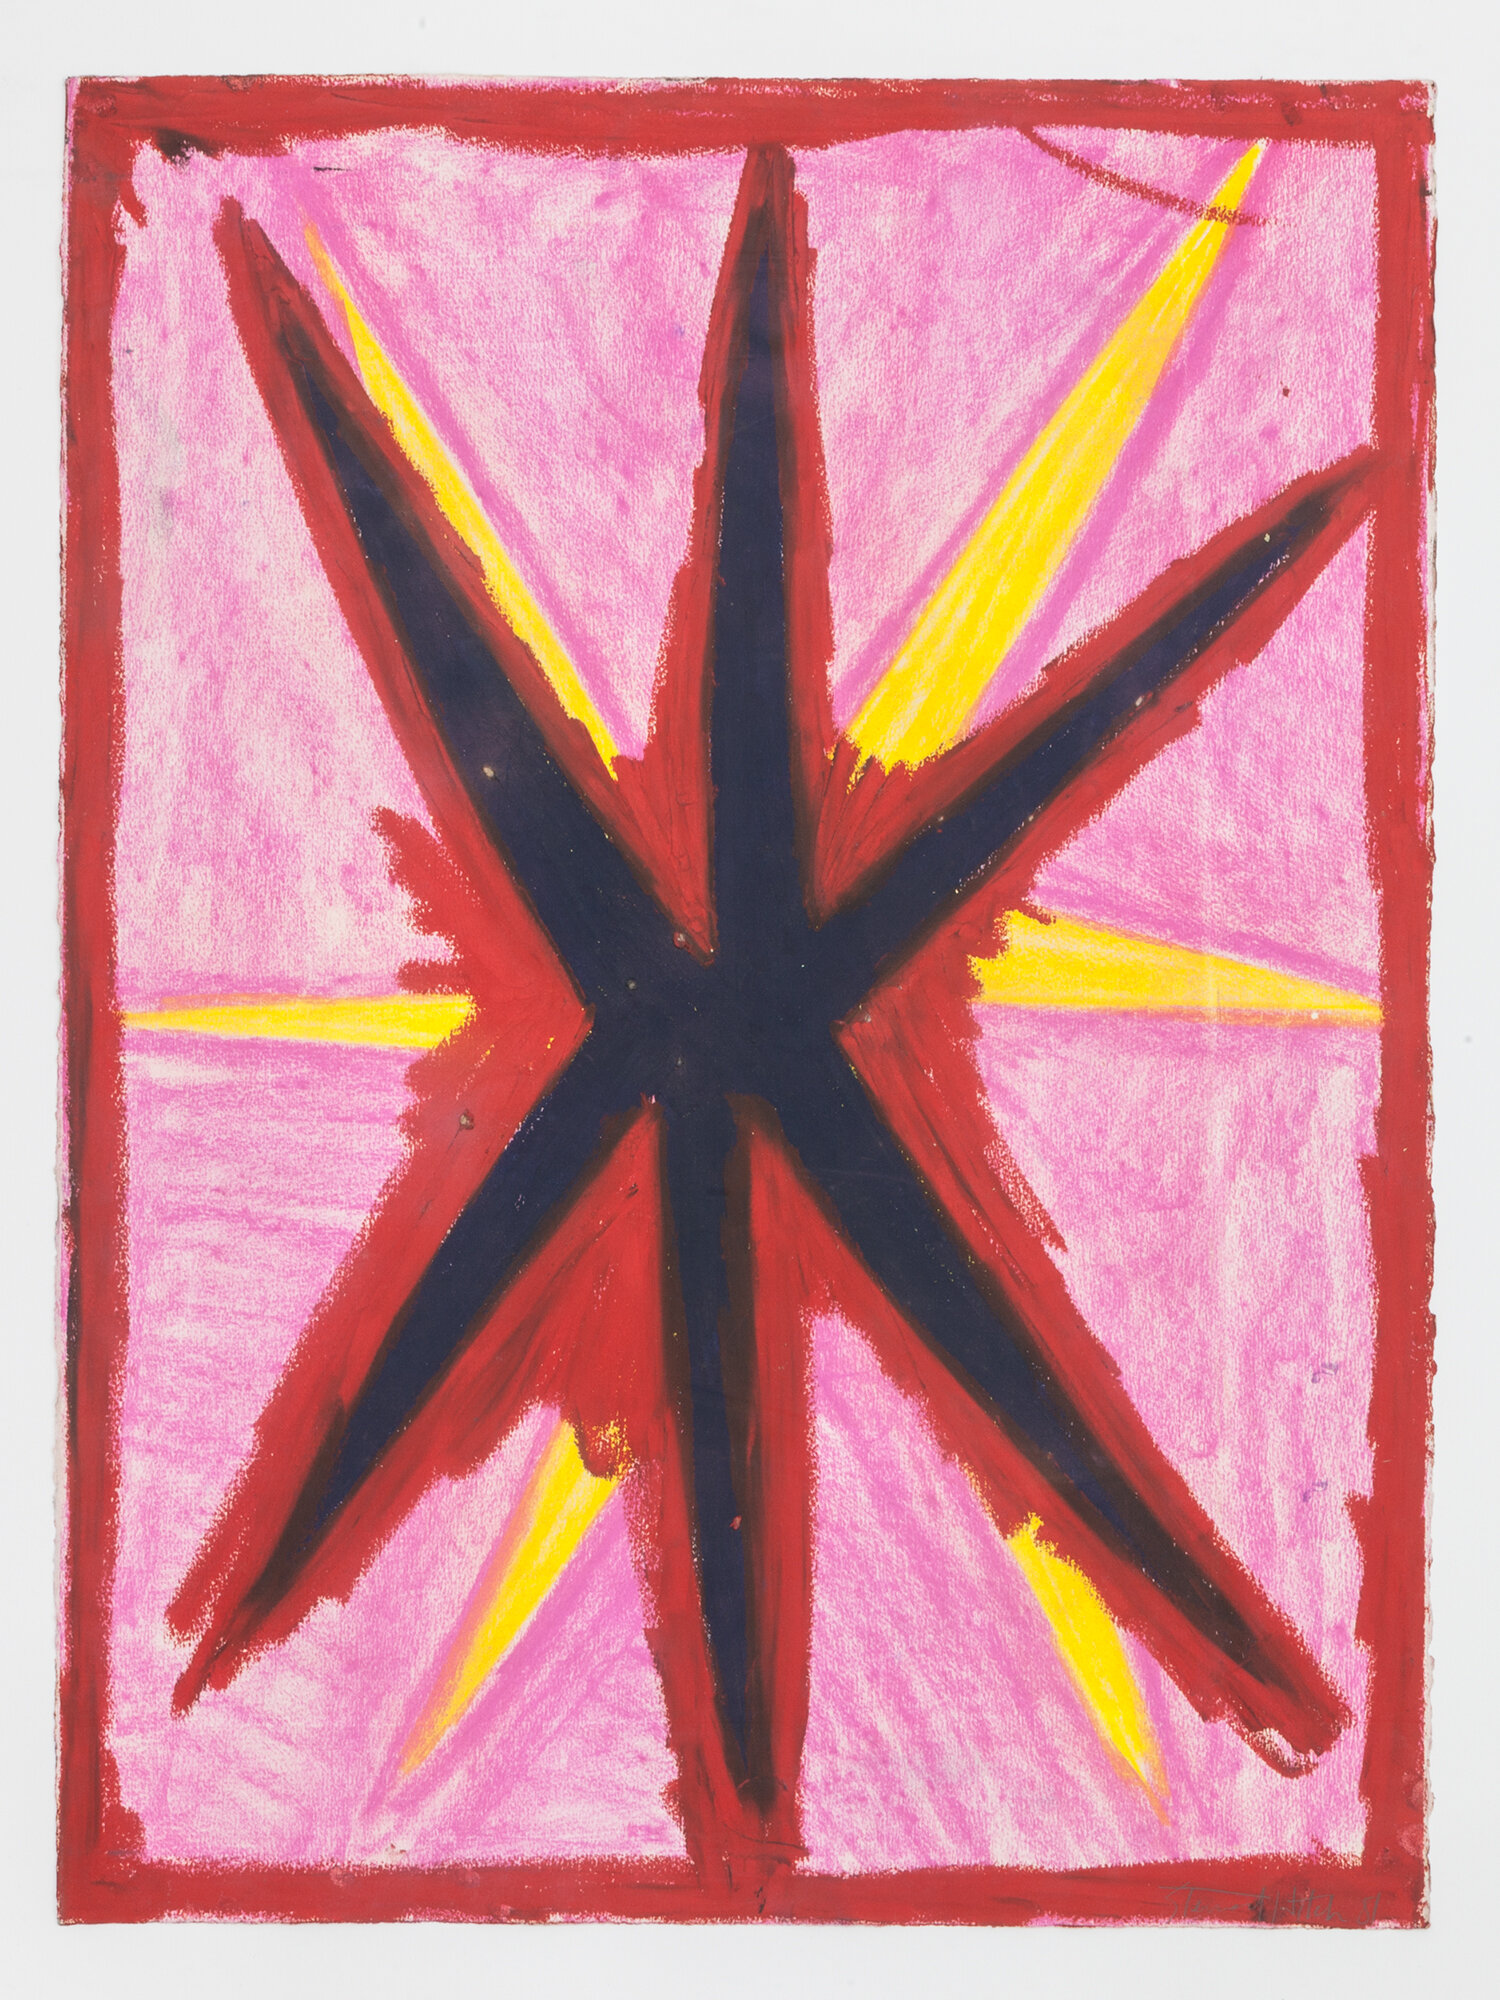  Stewart Hitch,  Untitled,  1981, Oil stick on paper 30 x 22 inches 